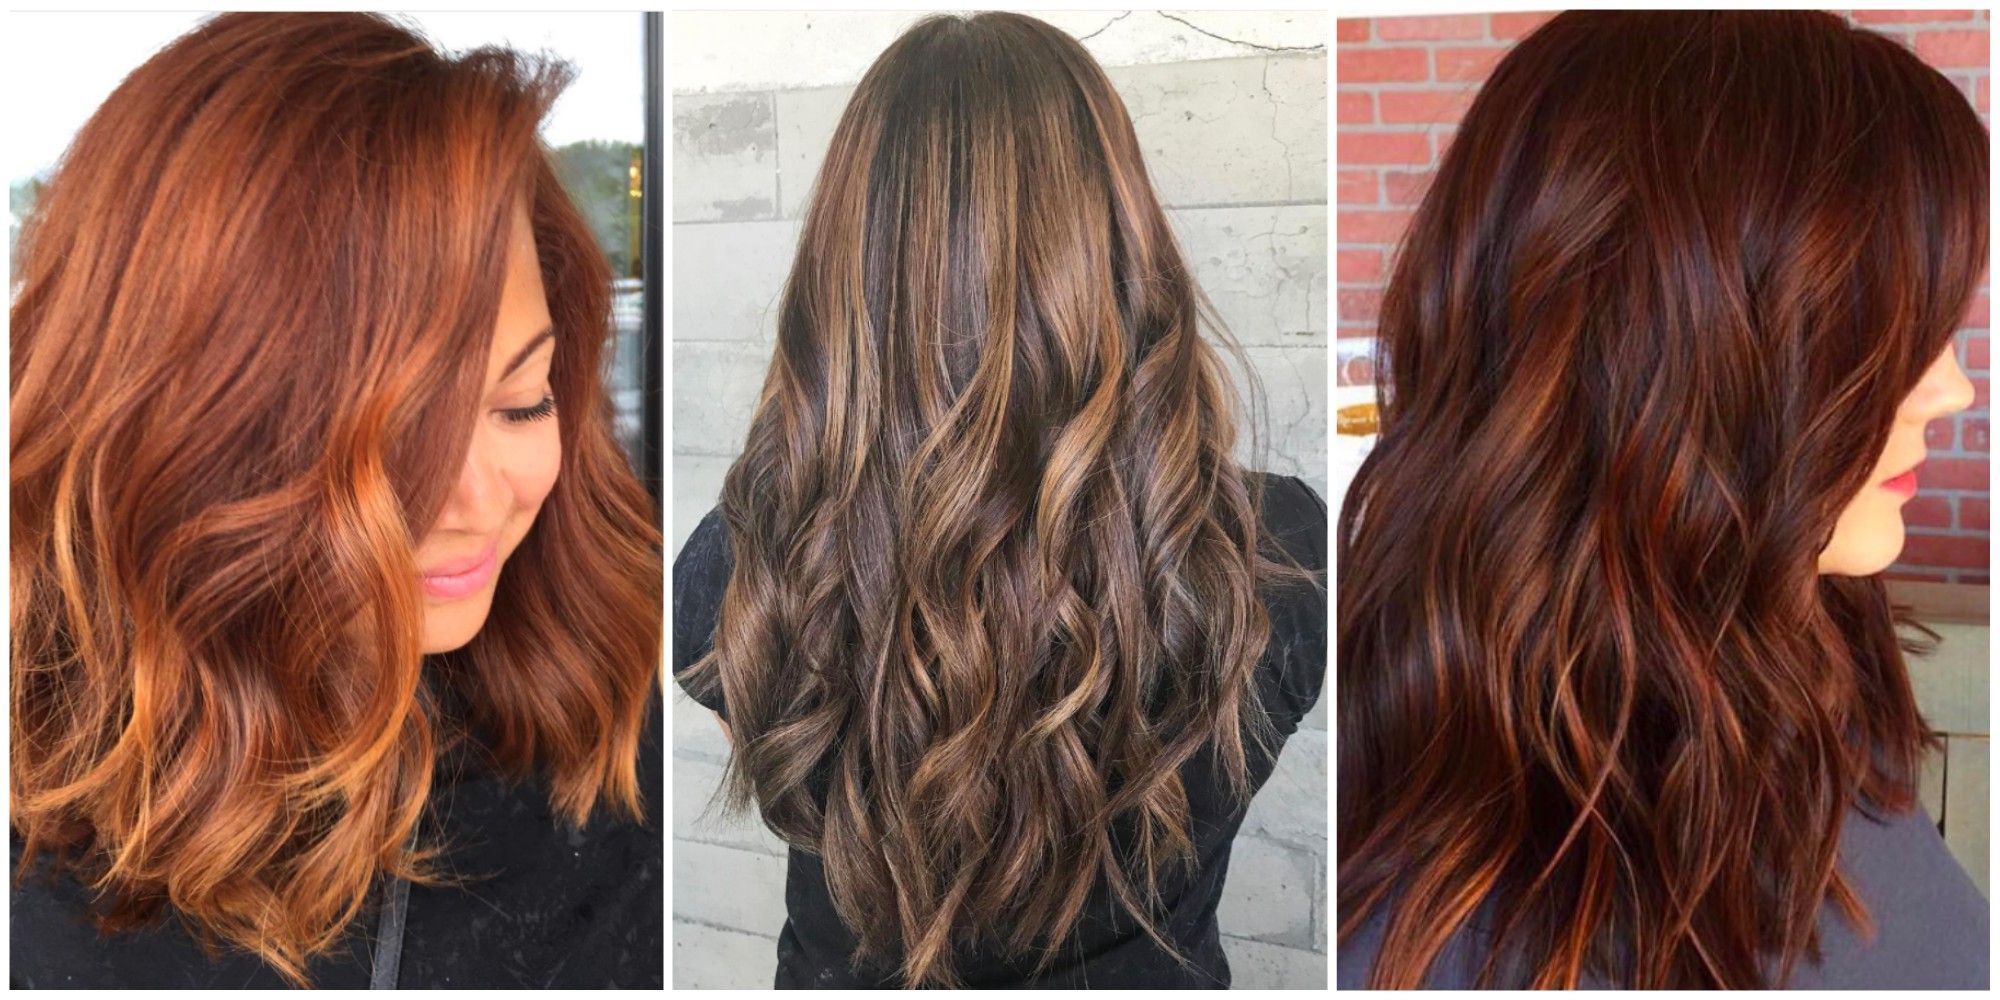 10 Hair Colors Inspired by Fall - Fall Hair Colors 2017